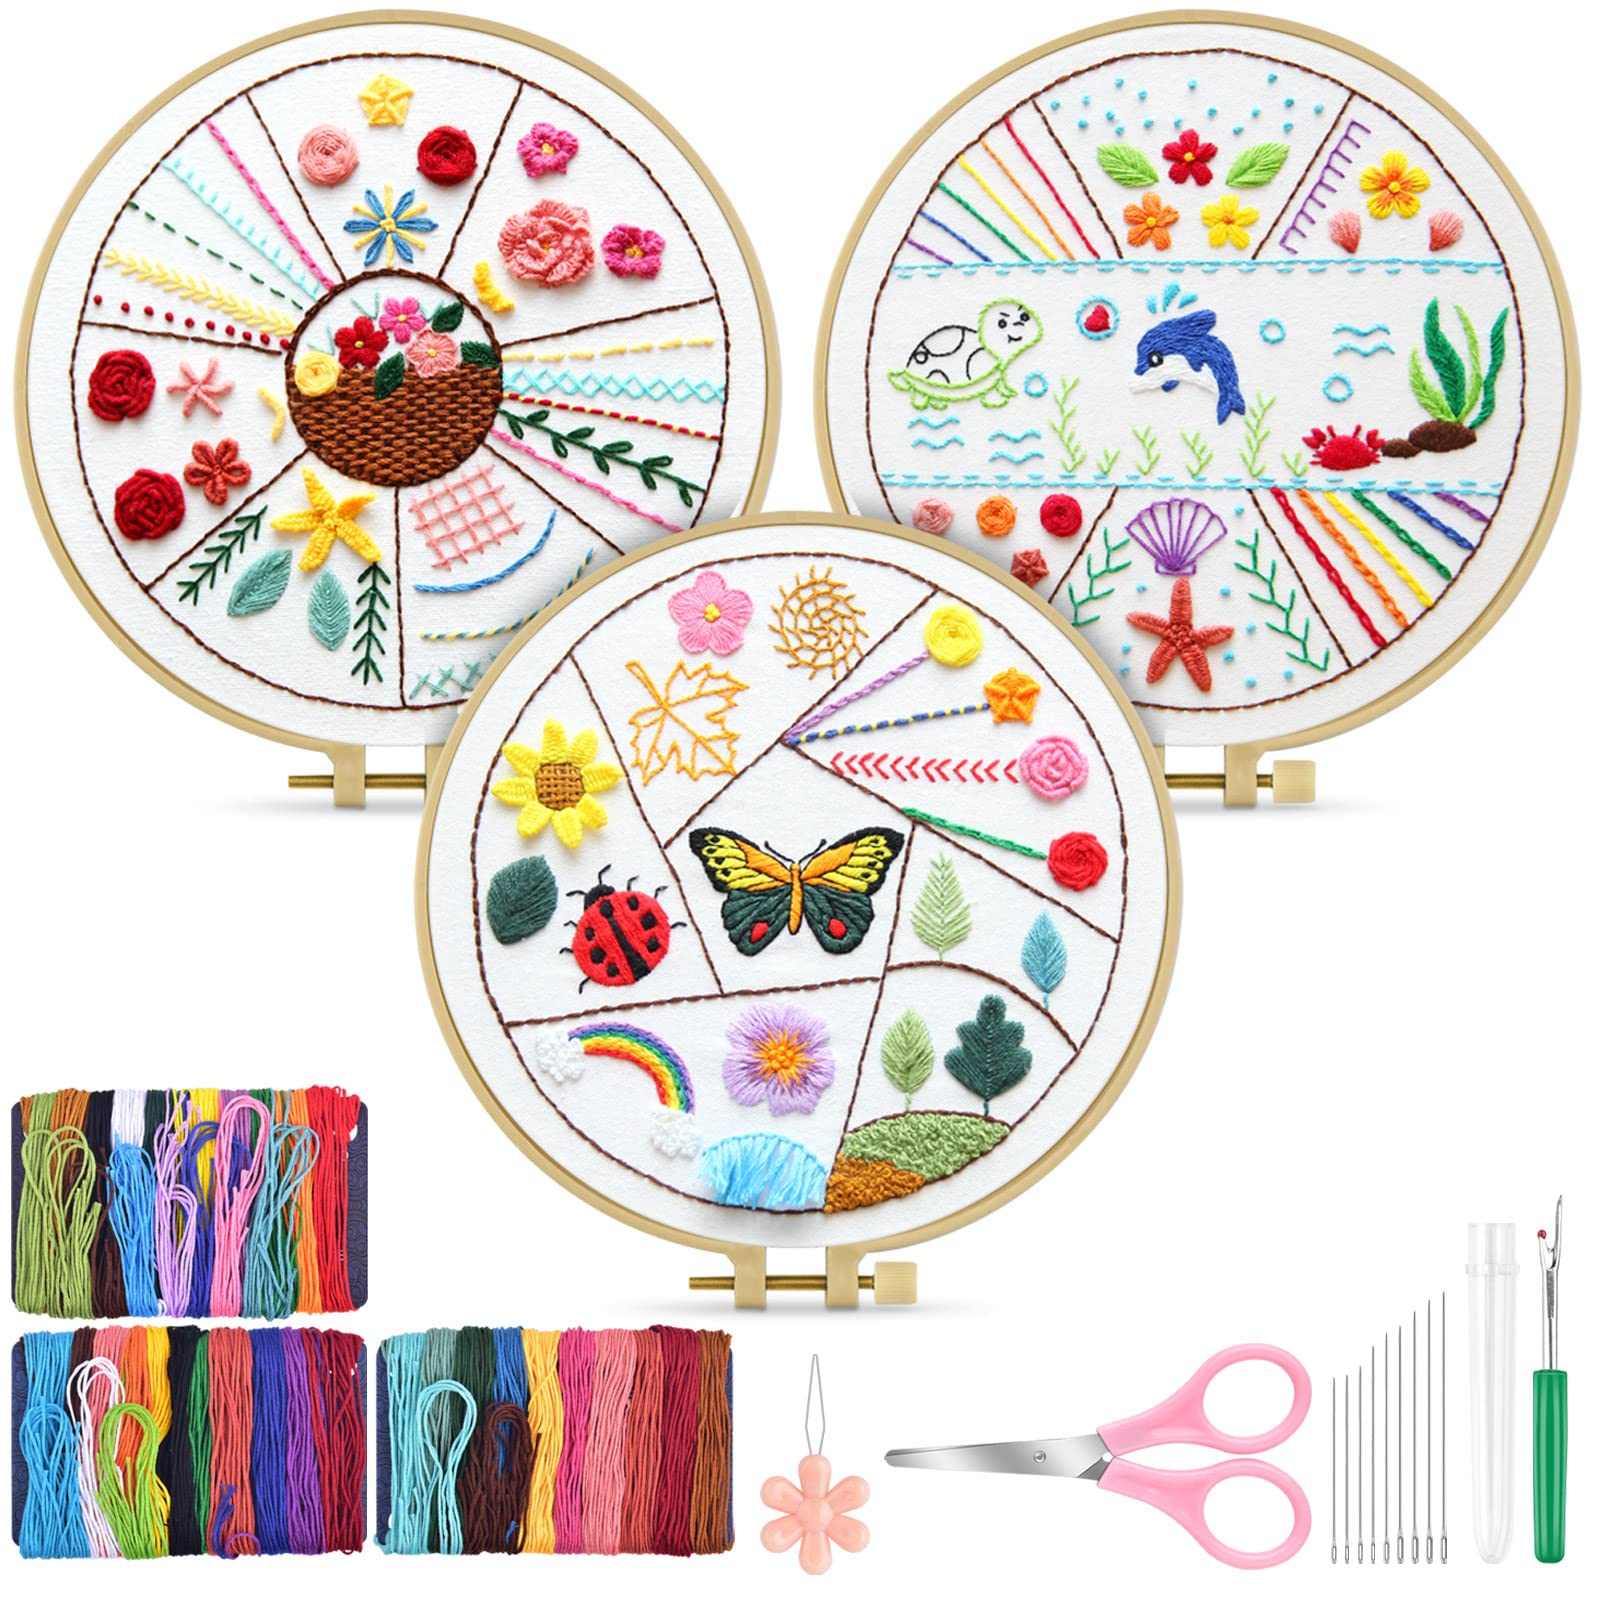 TINDTOP Beginners Embroidery Stitch Practice kit 3 Sets Animal Embroidery  Kit for Beginners Include Embroidery Cloth Hoops Threads for Craft Lover  Hand Stitch with Embroidery Skill Techniques Colorful